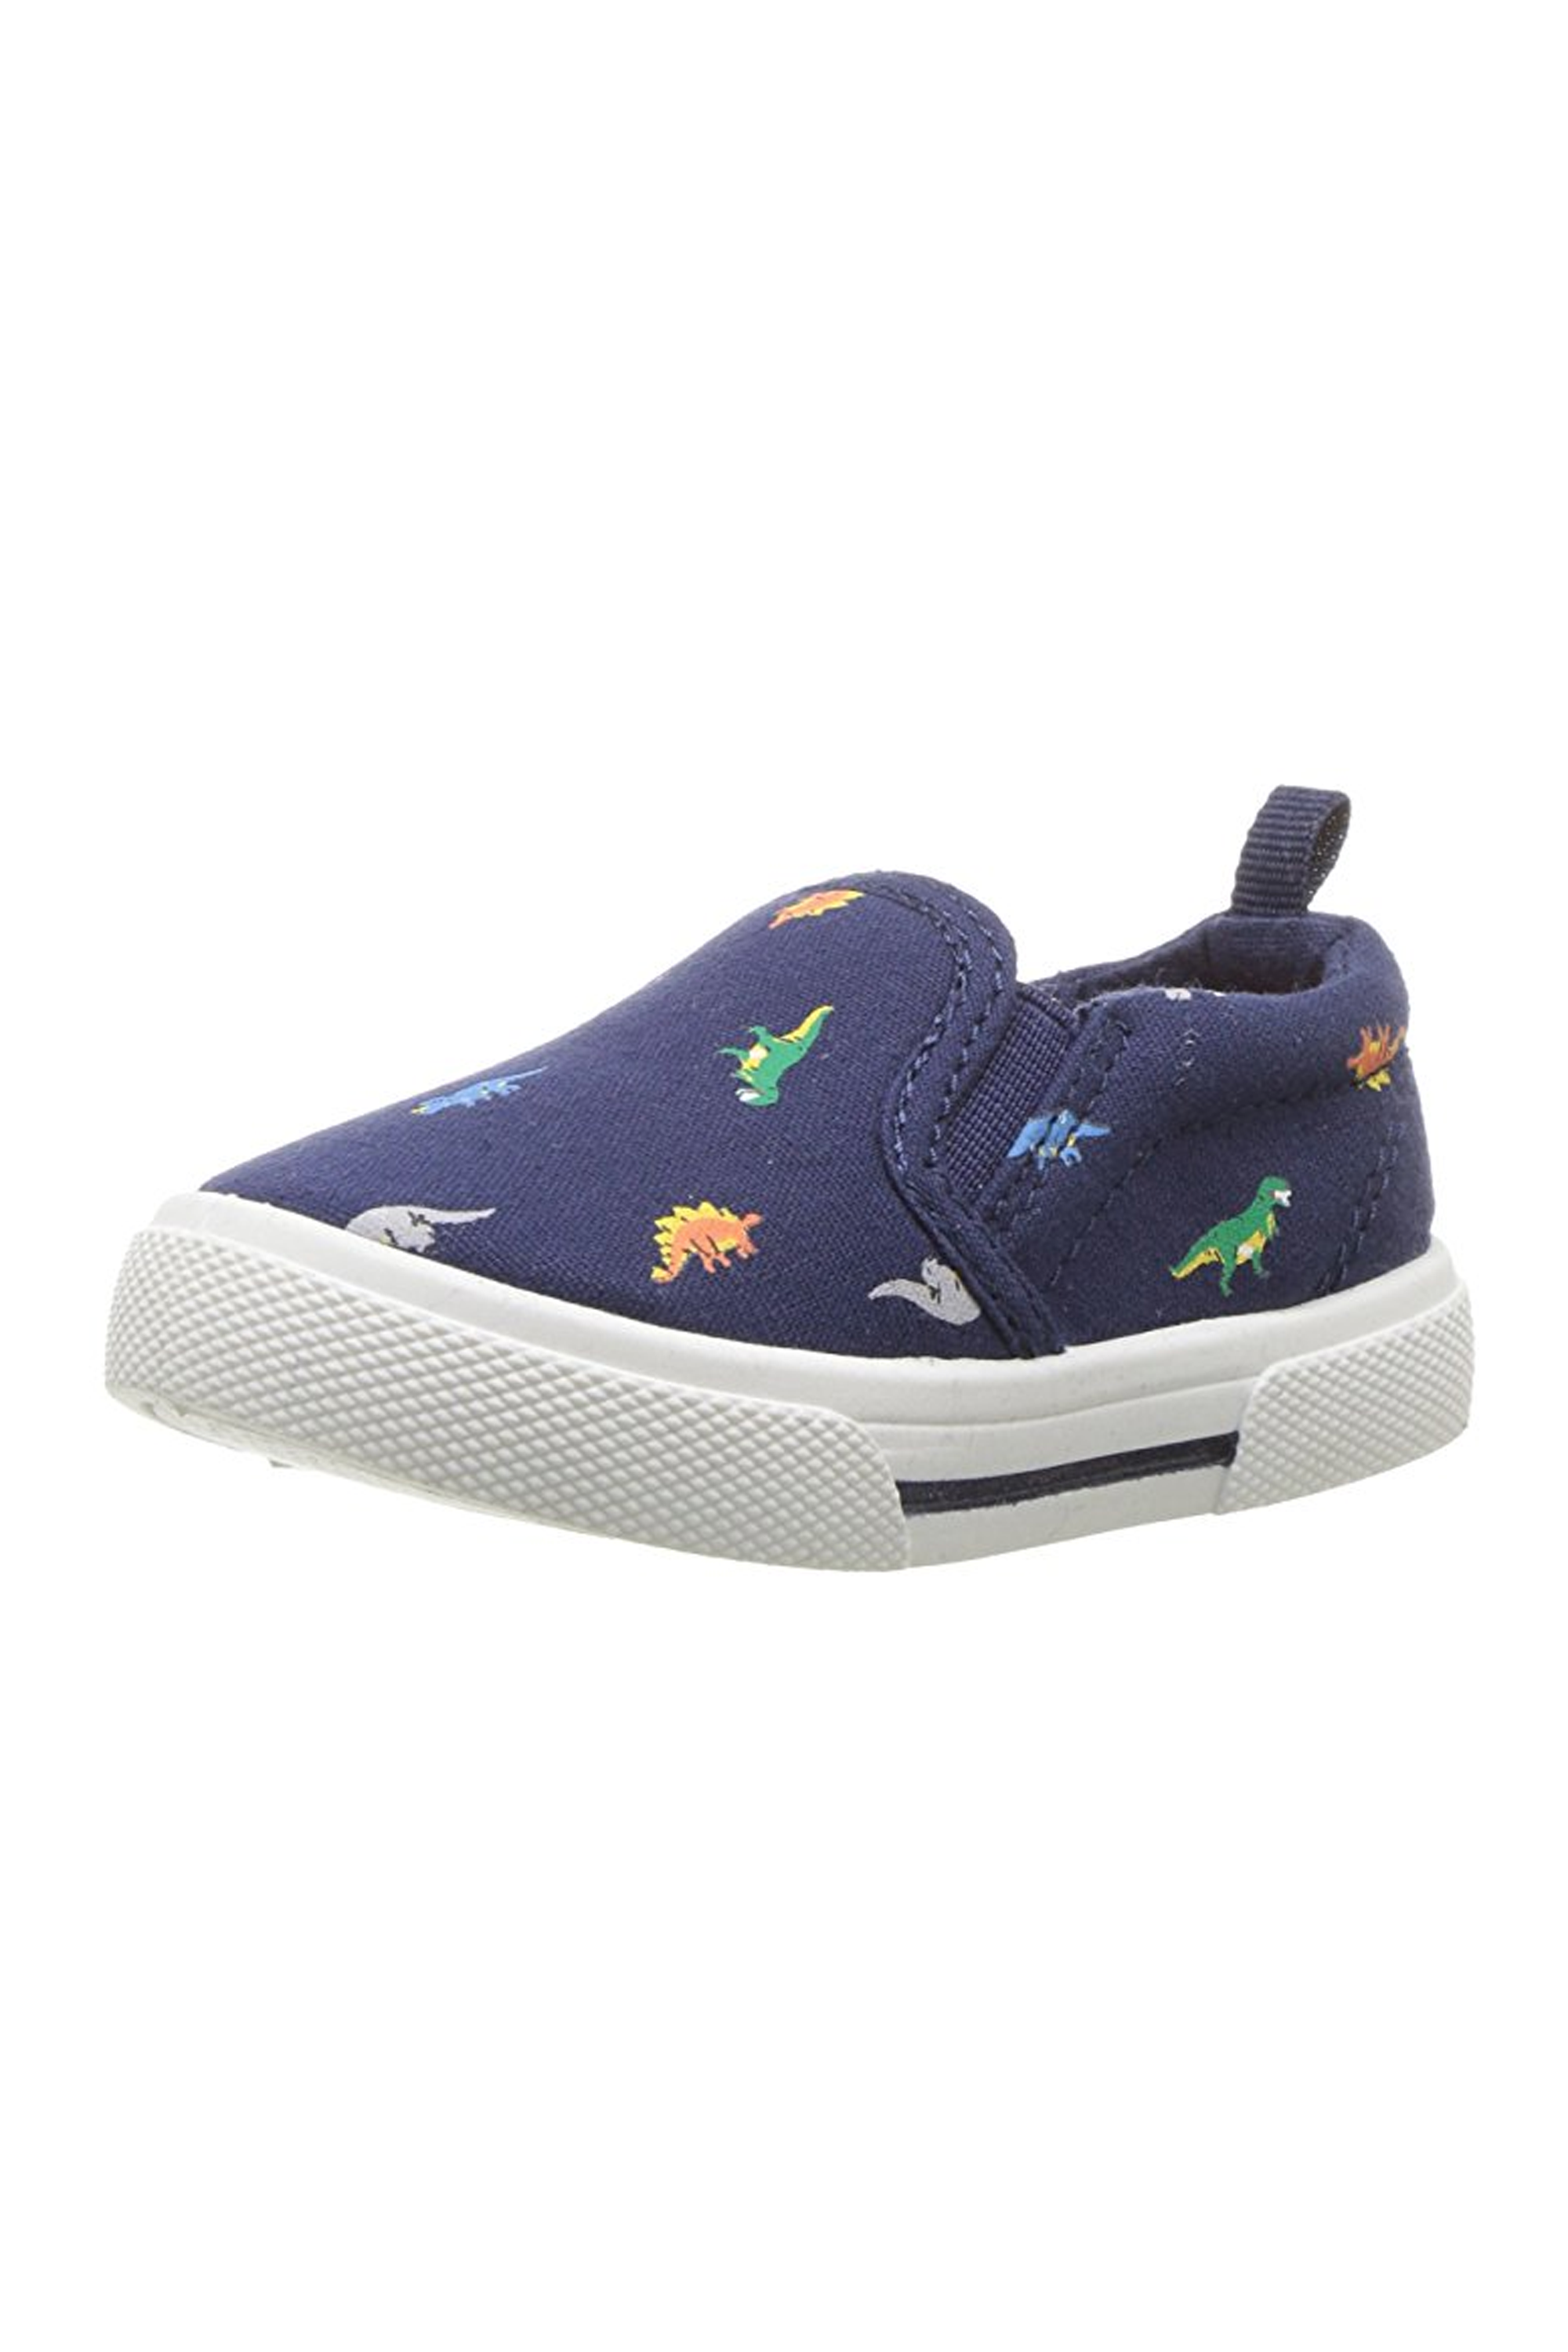 carter shoes for toddlers